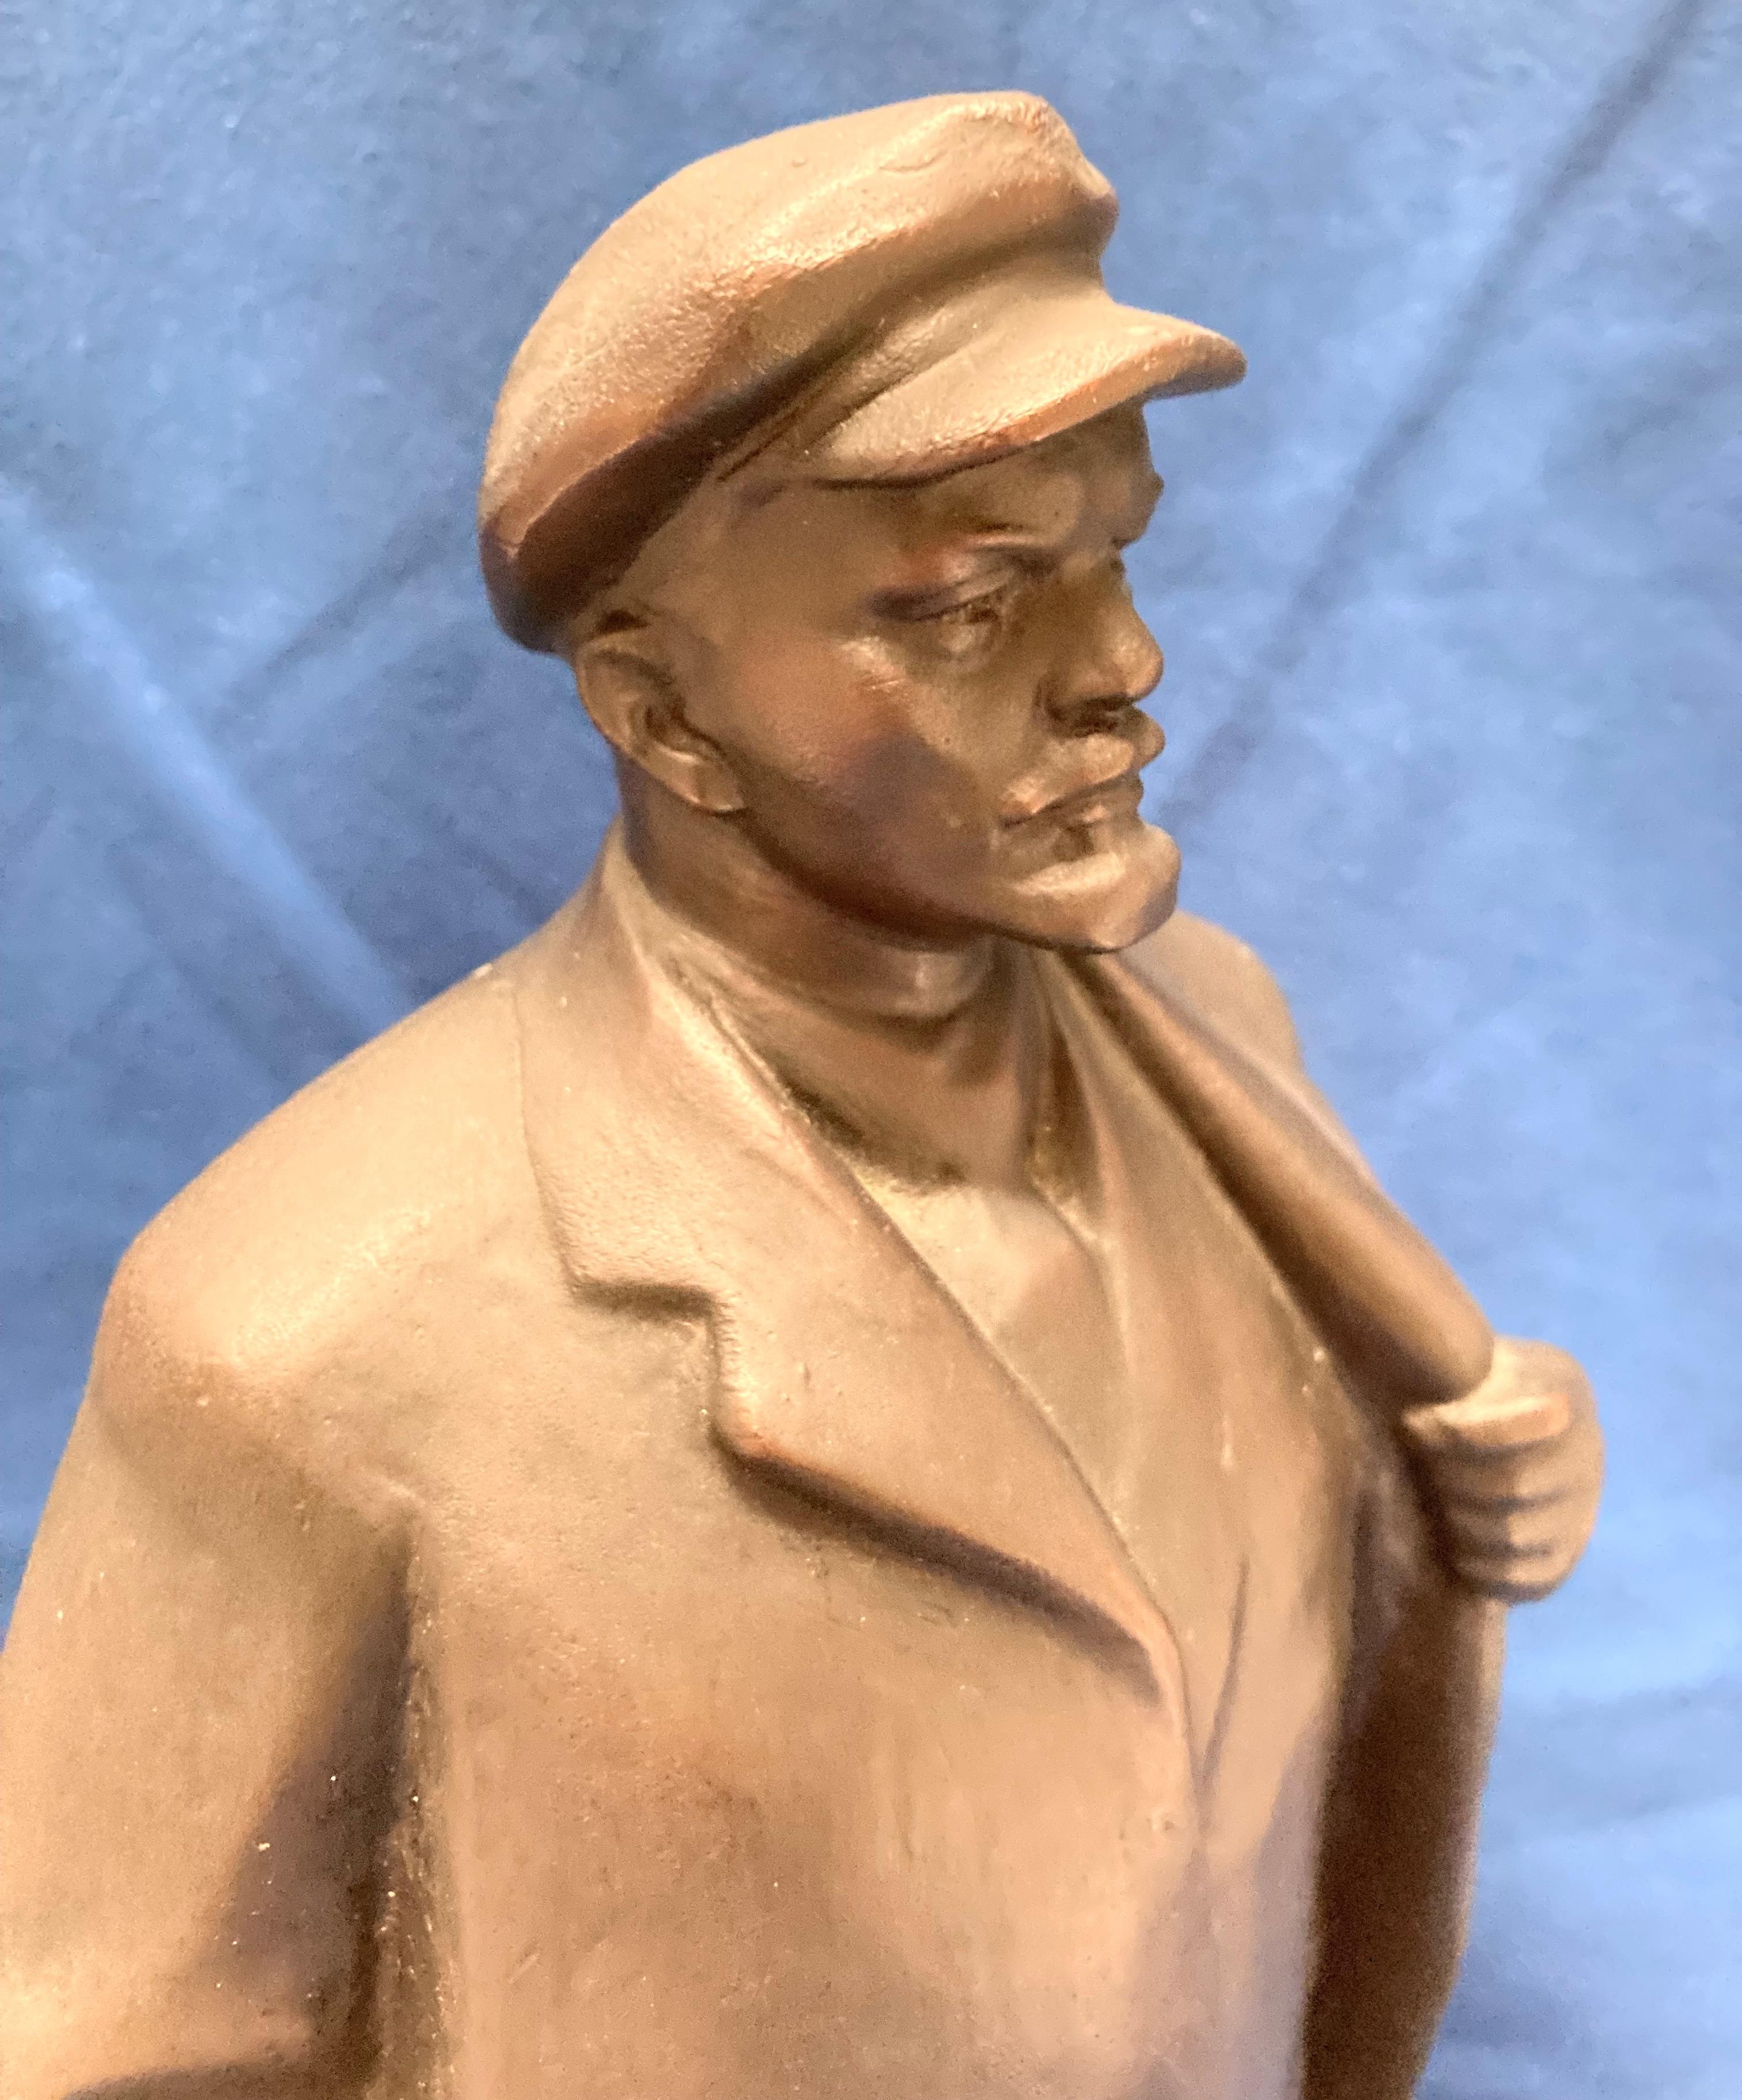 A metal statue of Lenin, - Image 10 of 11